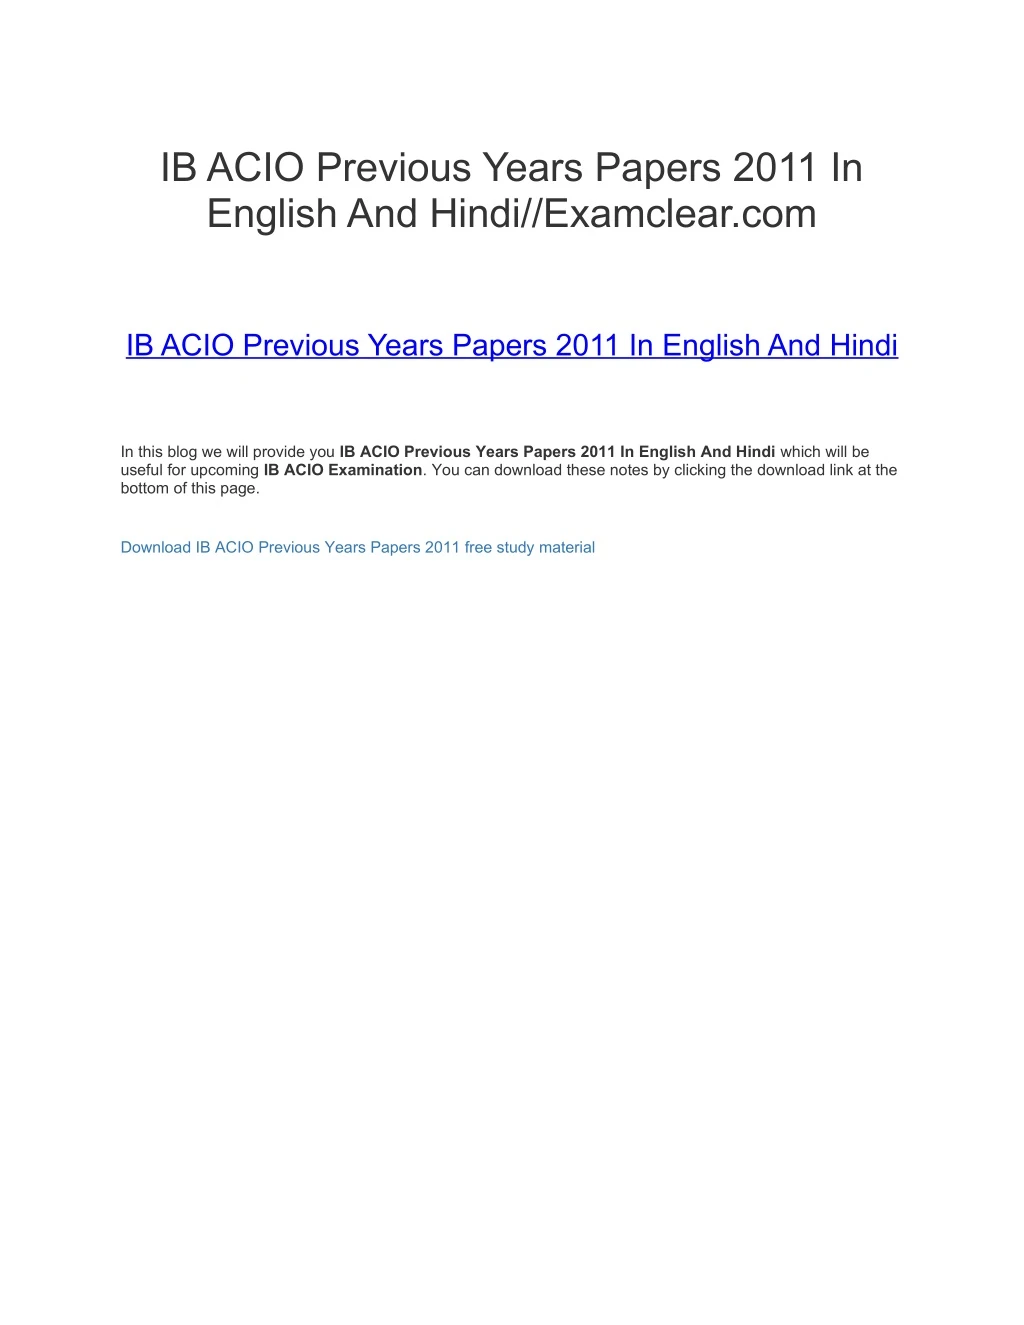 ib acio previous years papers 2011 in english